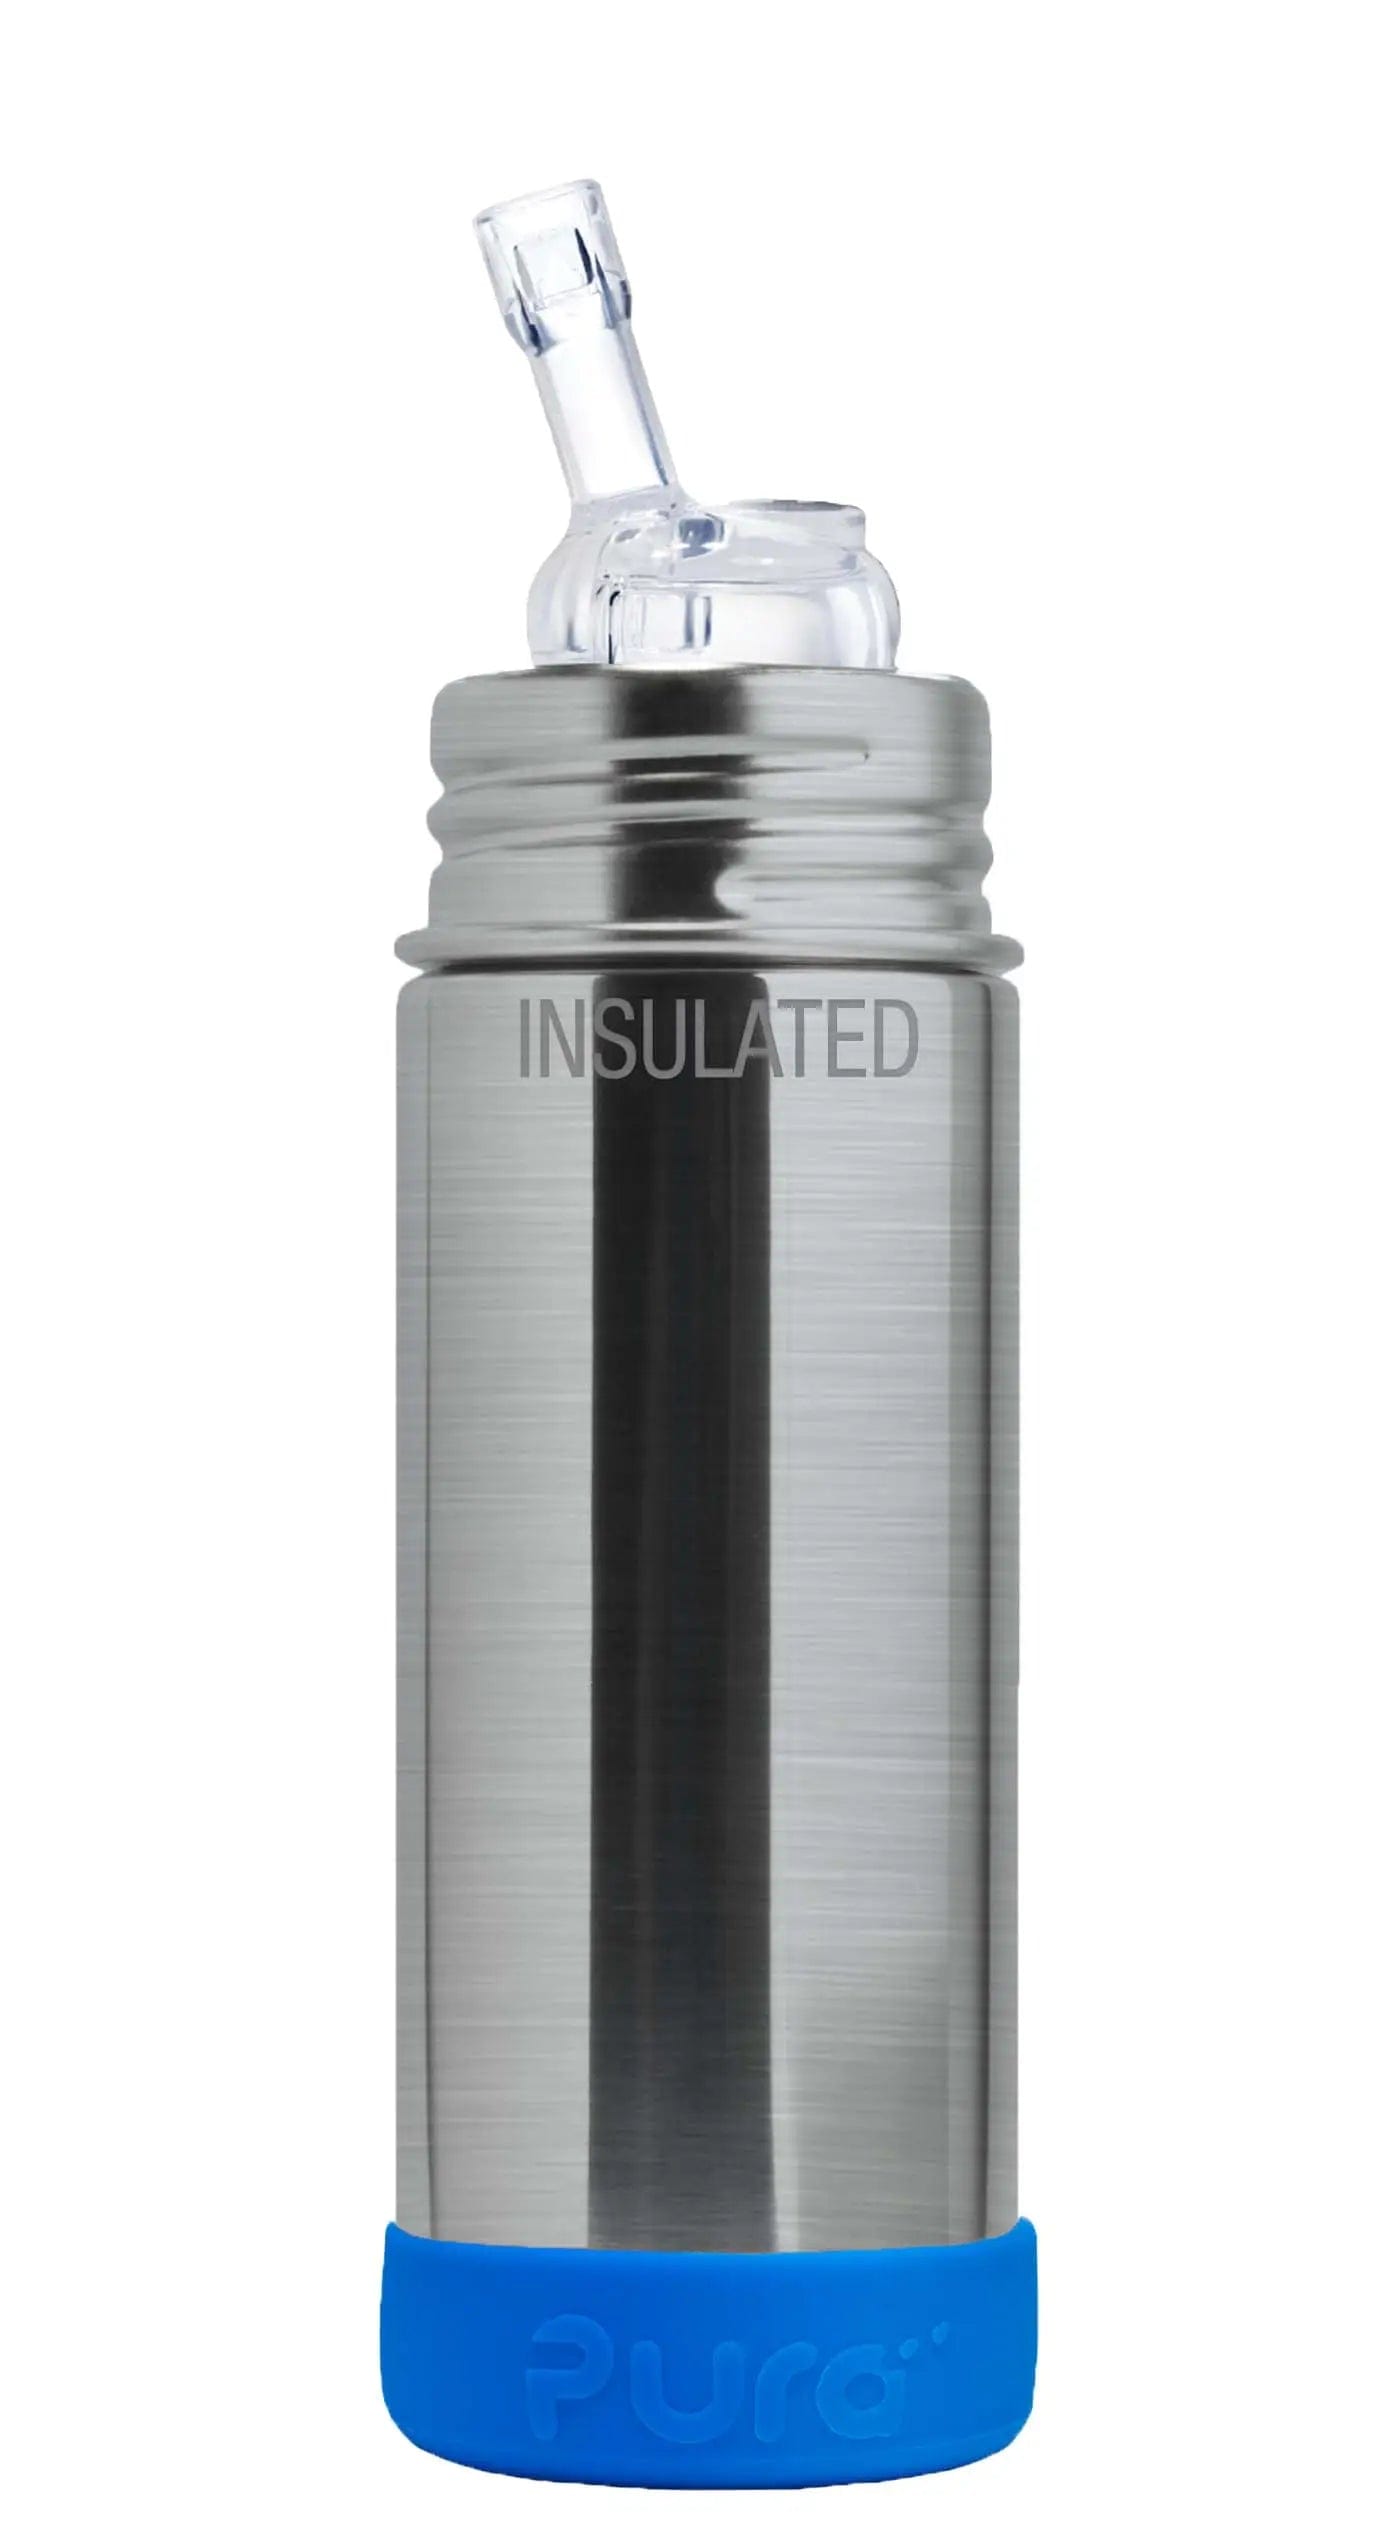 Thinkbaby Baby Bottle, Stainless Steel, 9 oz